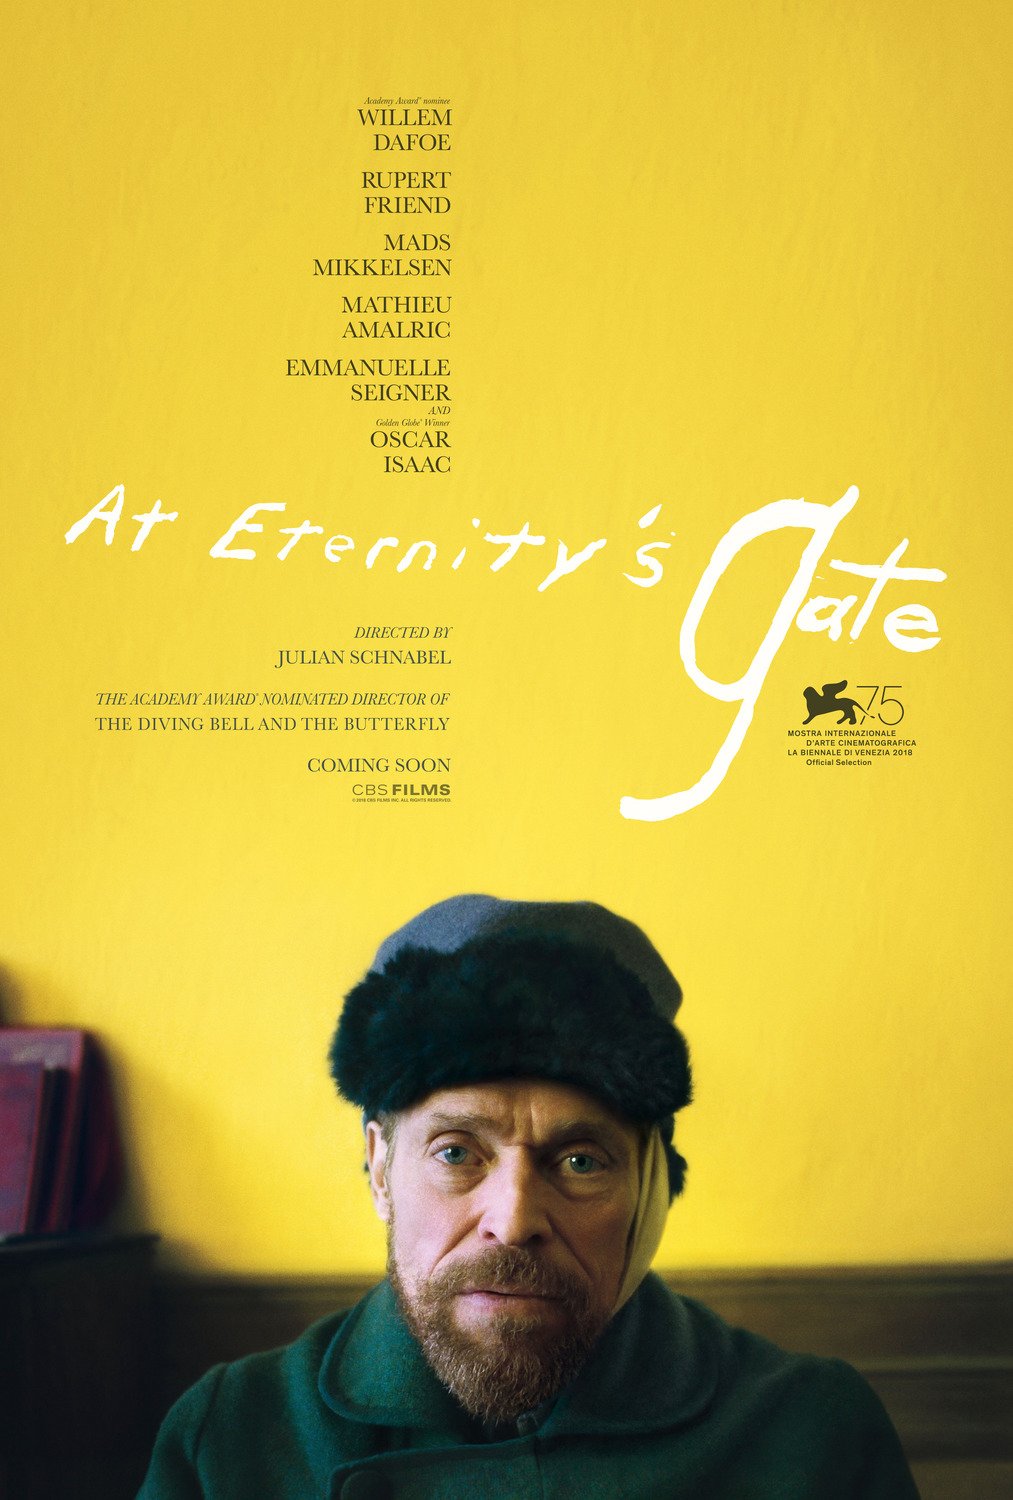 Films anglais 2018 : At Eternity's Gate